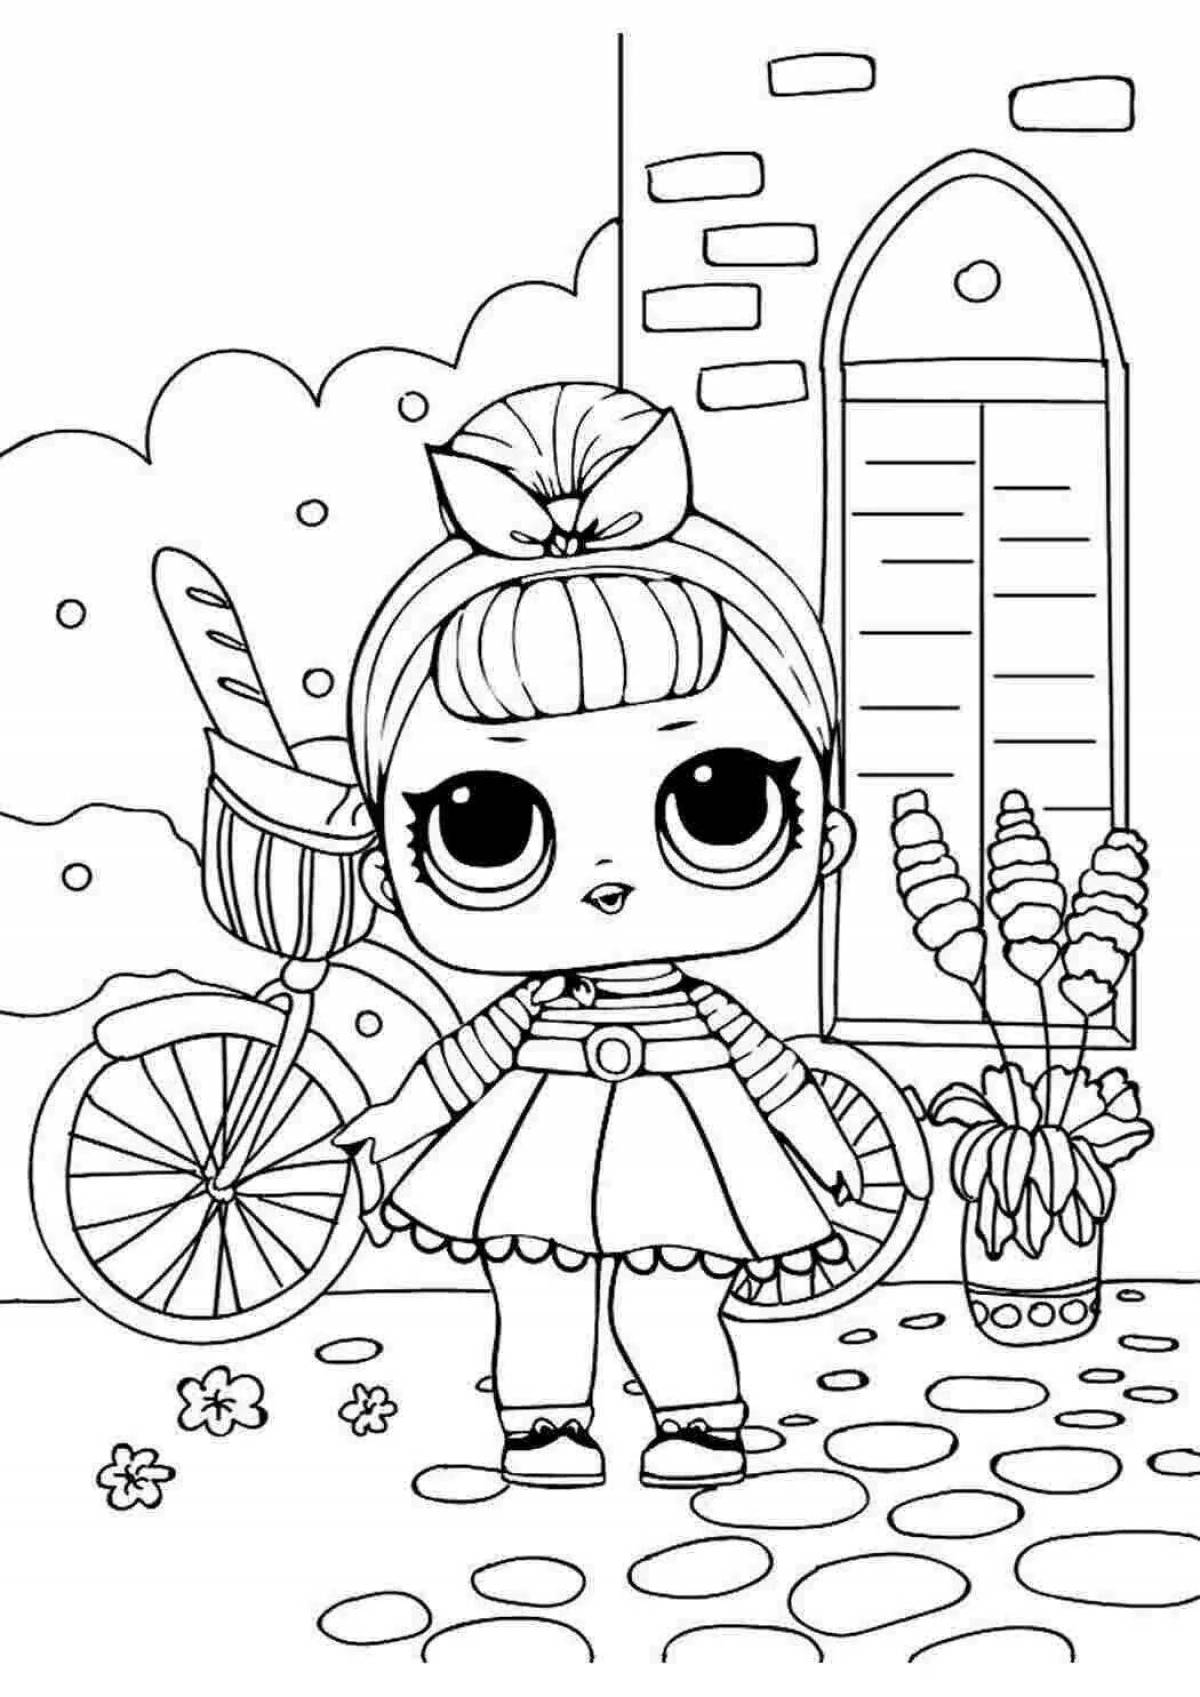 Fairytale lol coloring book for girls 7 years old